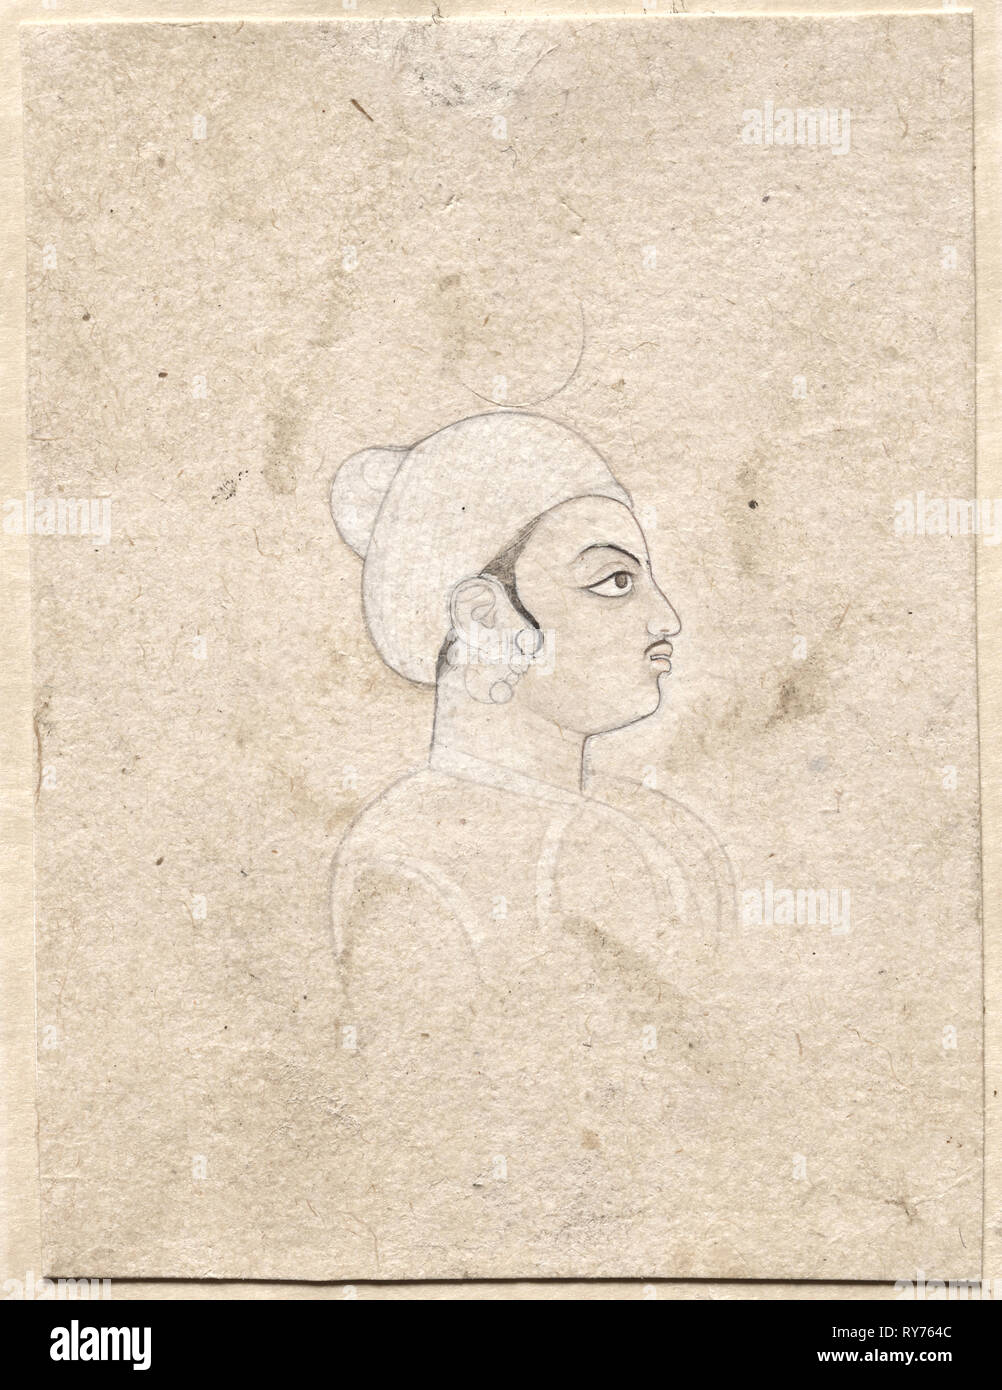 Portrait of a Man, late 1700s. India, Pahari, late 18th century. Ink on paper; overall: 7.3 x 5.5 cm (2 7/8 x 2 3/16 in Stock Photo